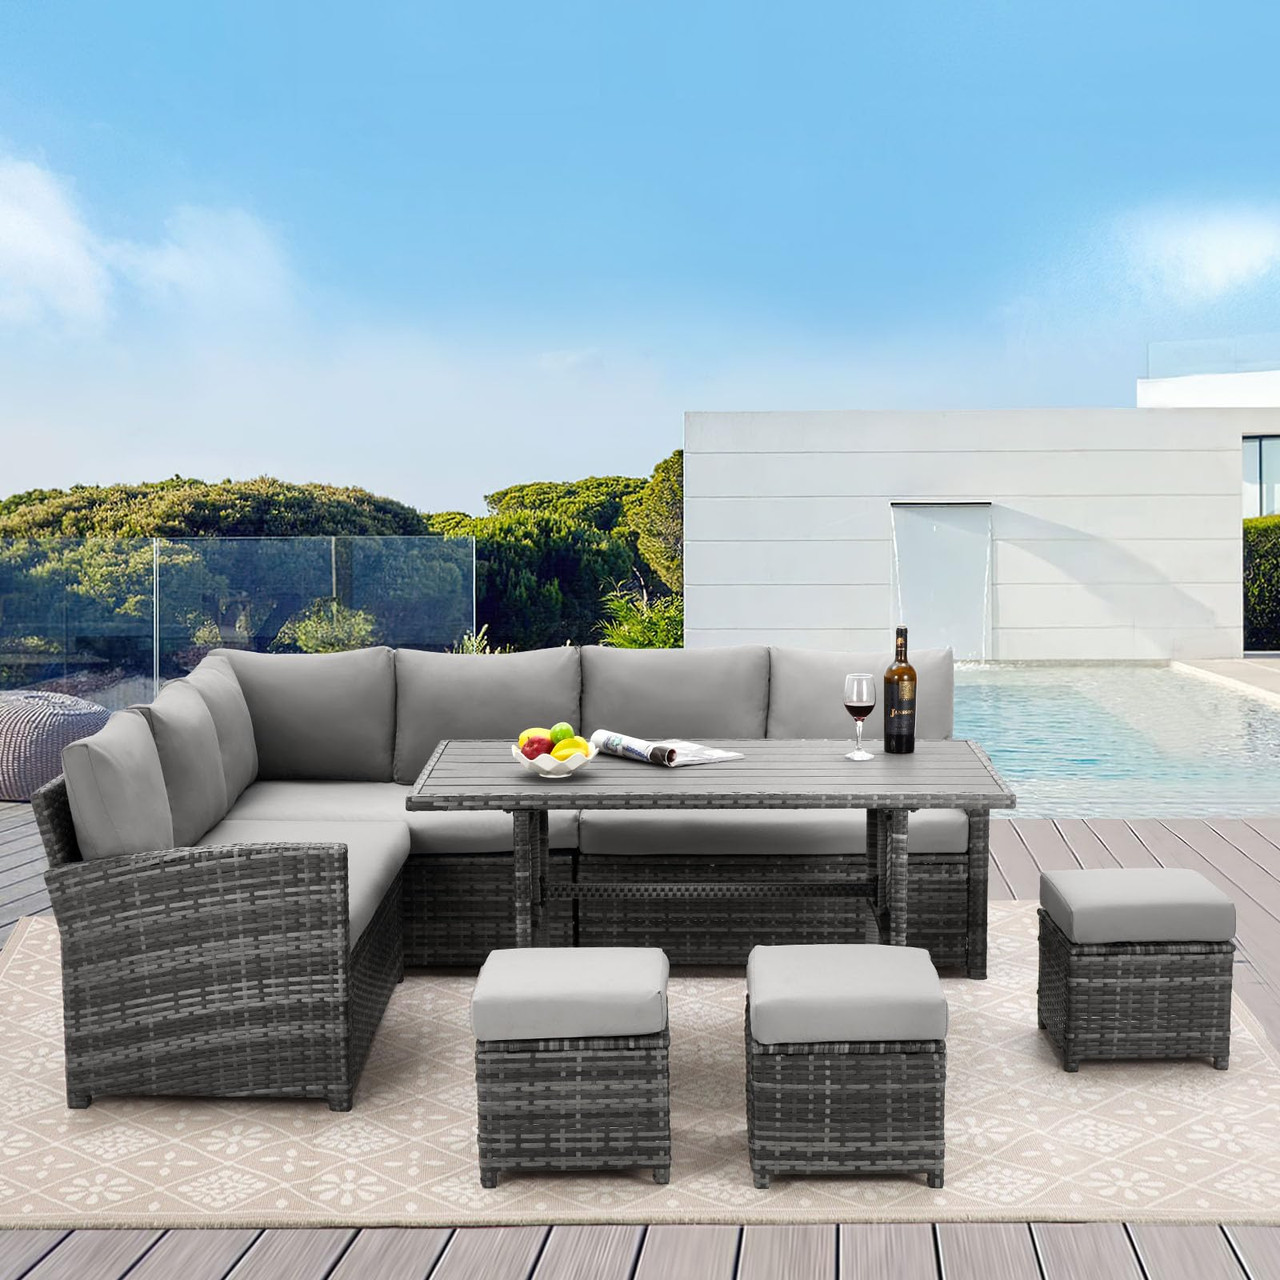 7-Piece Outdoor All-Weather Rattan Wicker Sectional Sofa Set product image